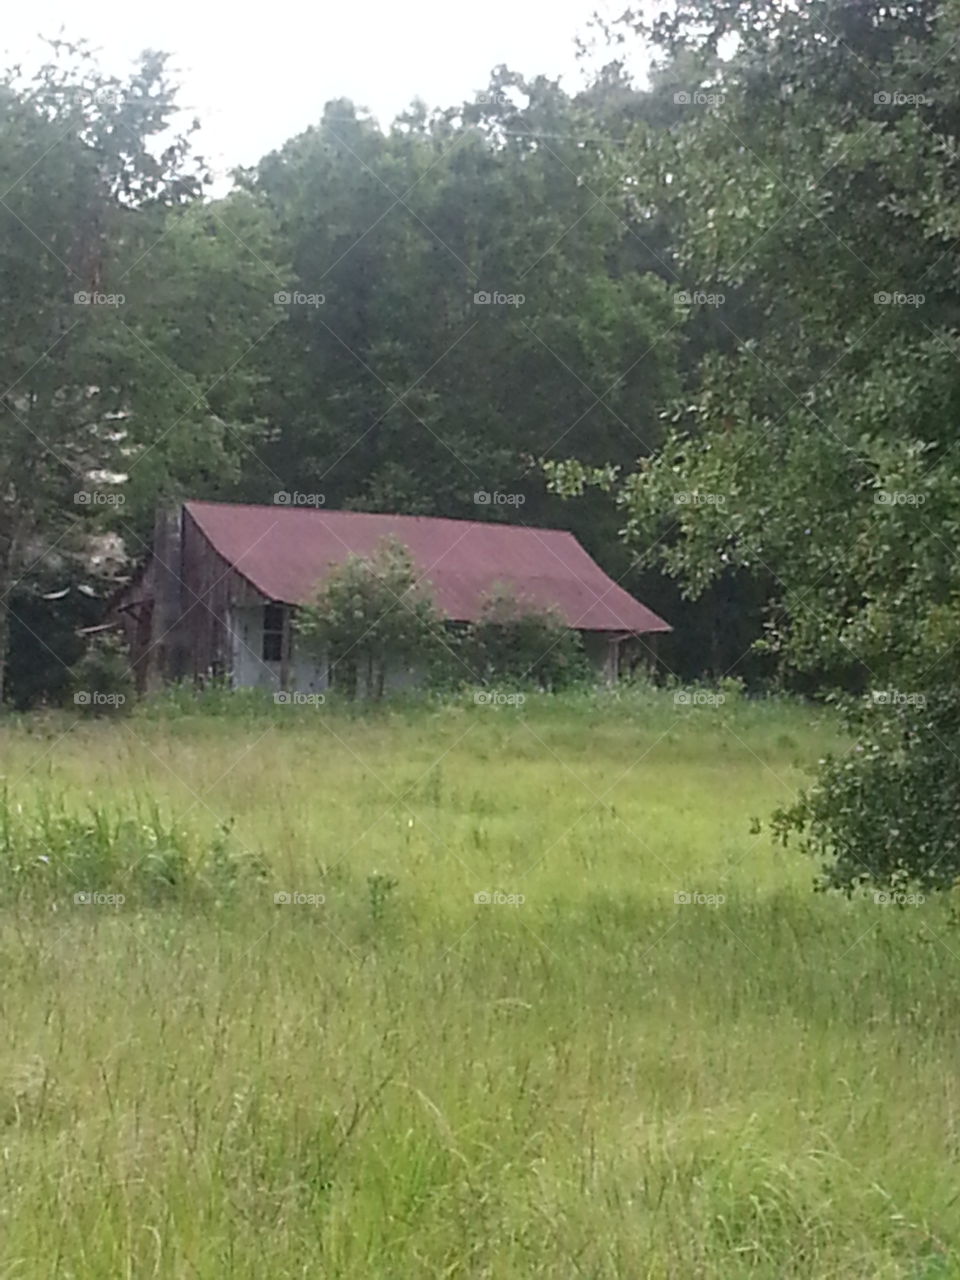 Old homestead. Saw this abandoned home on my way back home from north Louisiana,